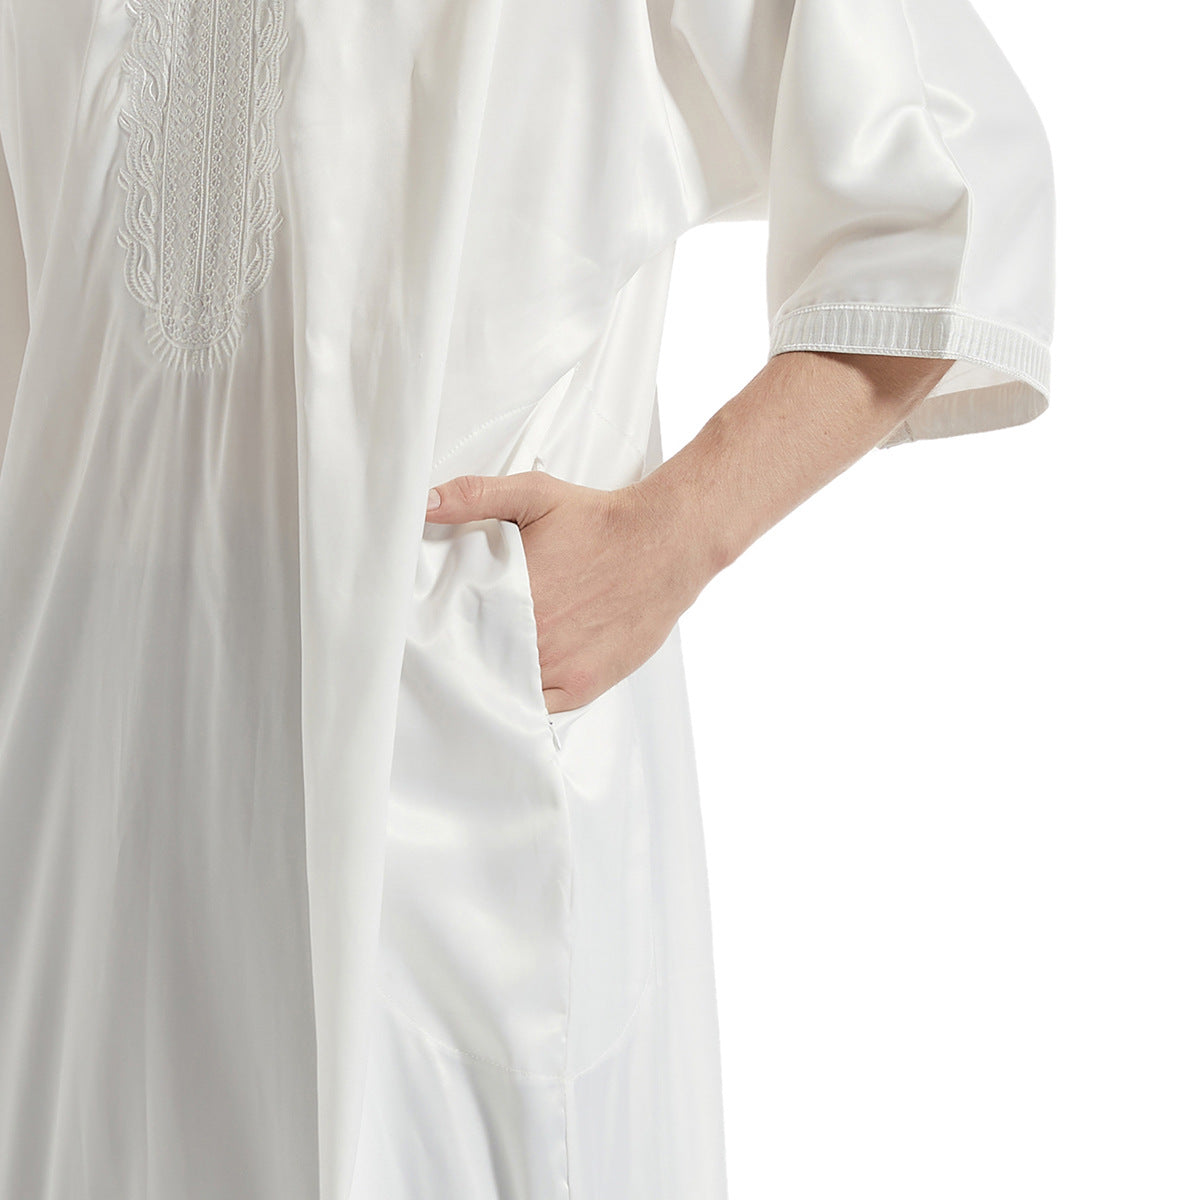 Explore Hikmah Boutique's exclusive Men's White Half Sleeves Abaya, crafted with premium materials and featuring delicate embroidery. Elevate your modest clothing wardrobe with our affordable yet sophisticated Islamic clothing for men.